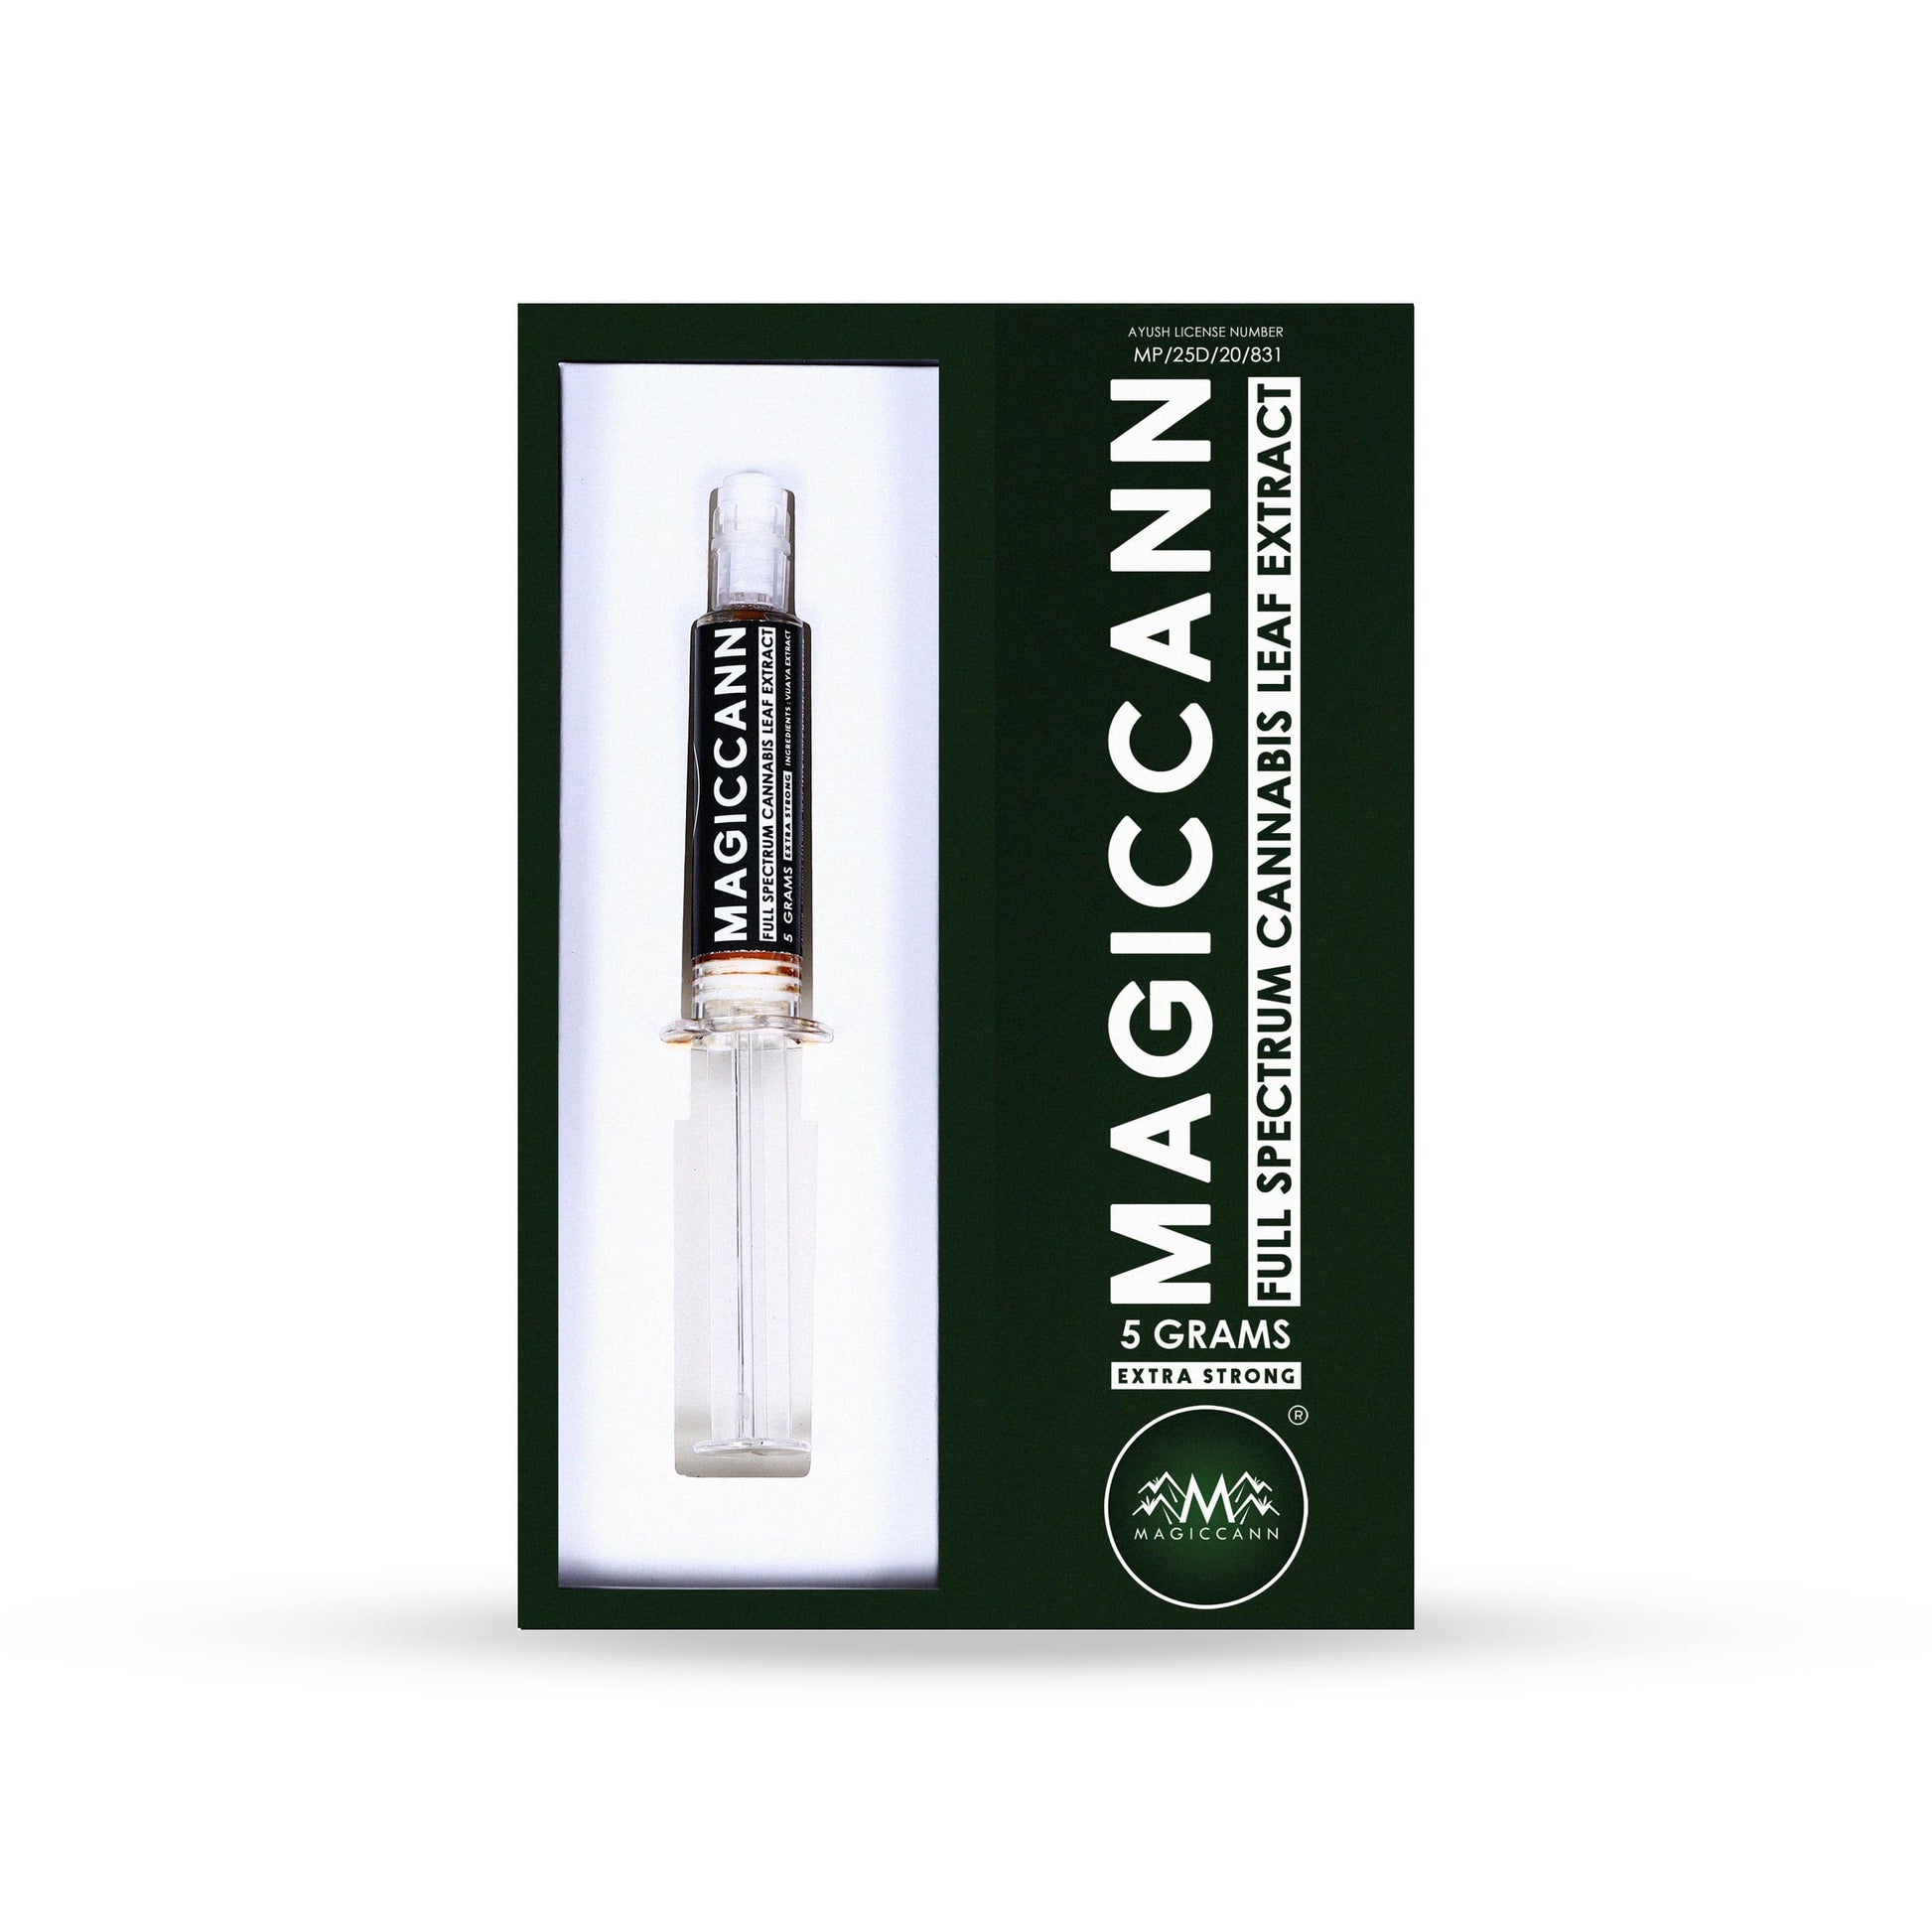 Magiccann Full spectrum Cannabis extract paste Extra Strong 5000 MG